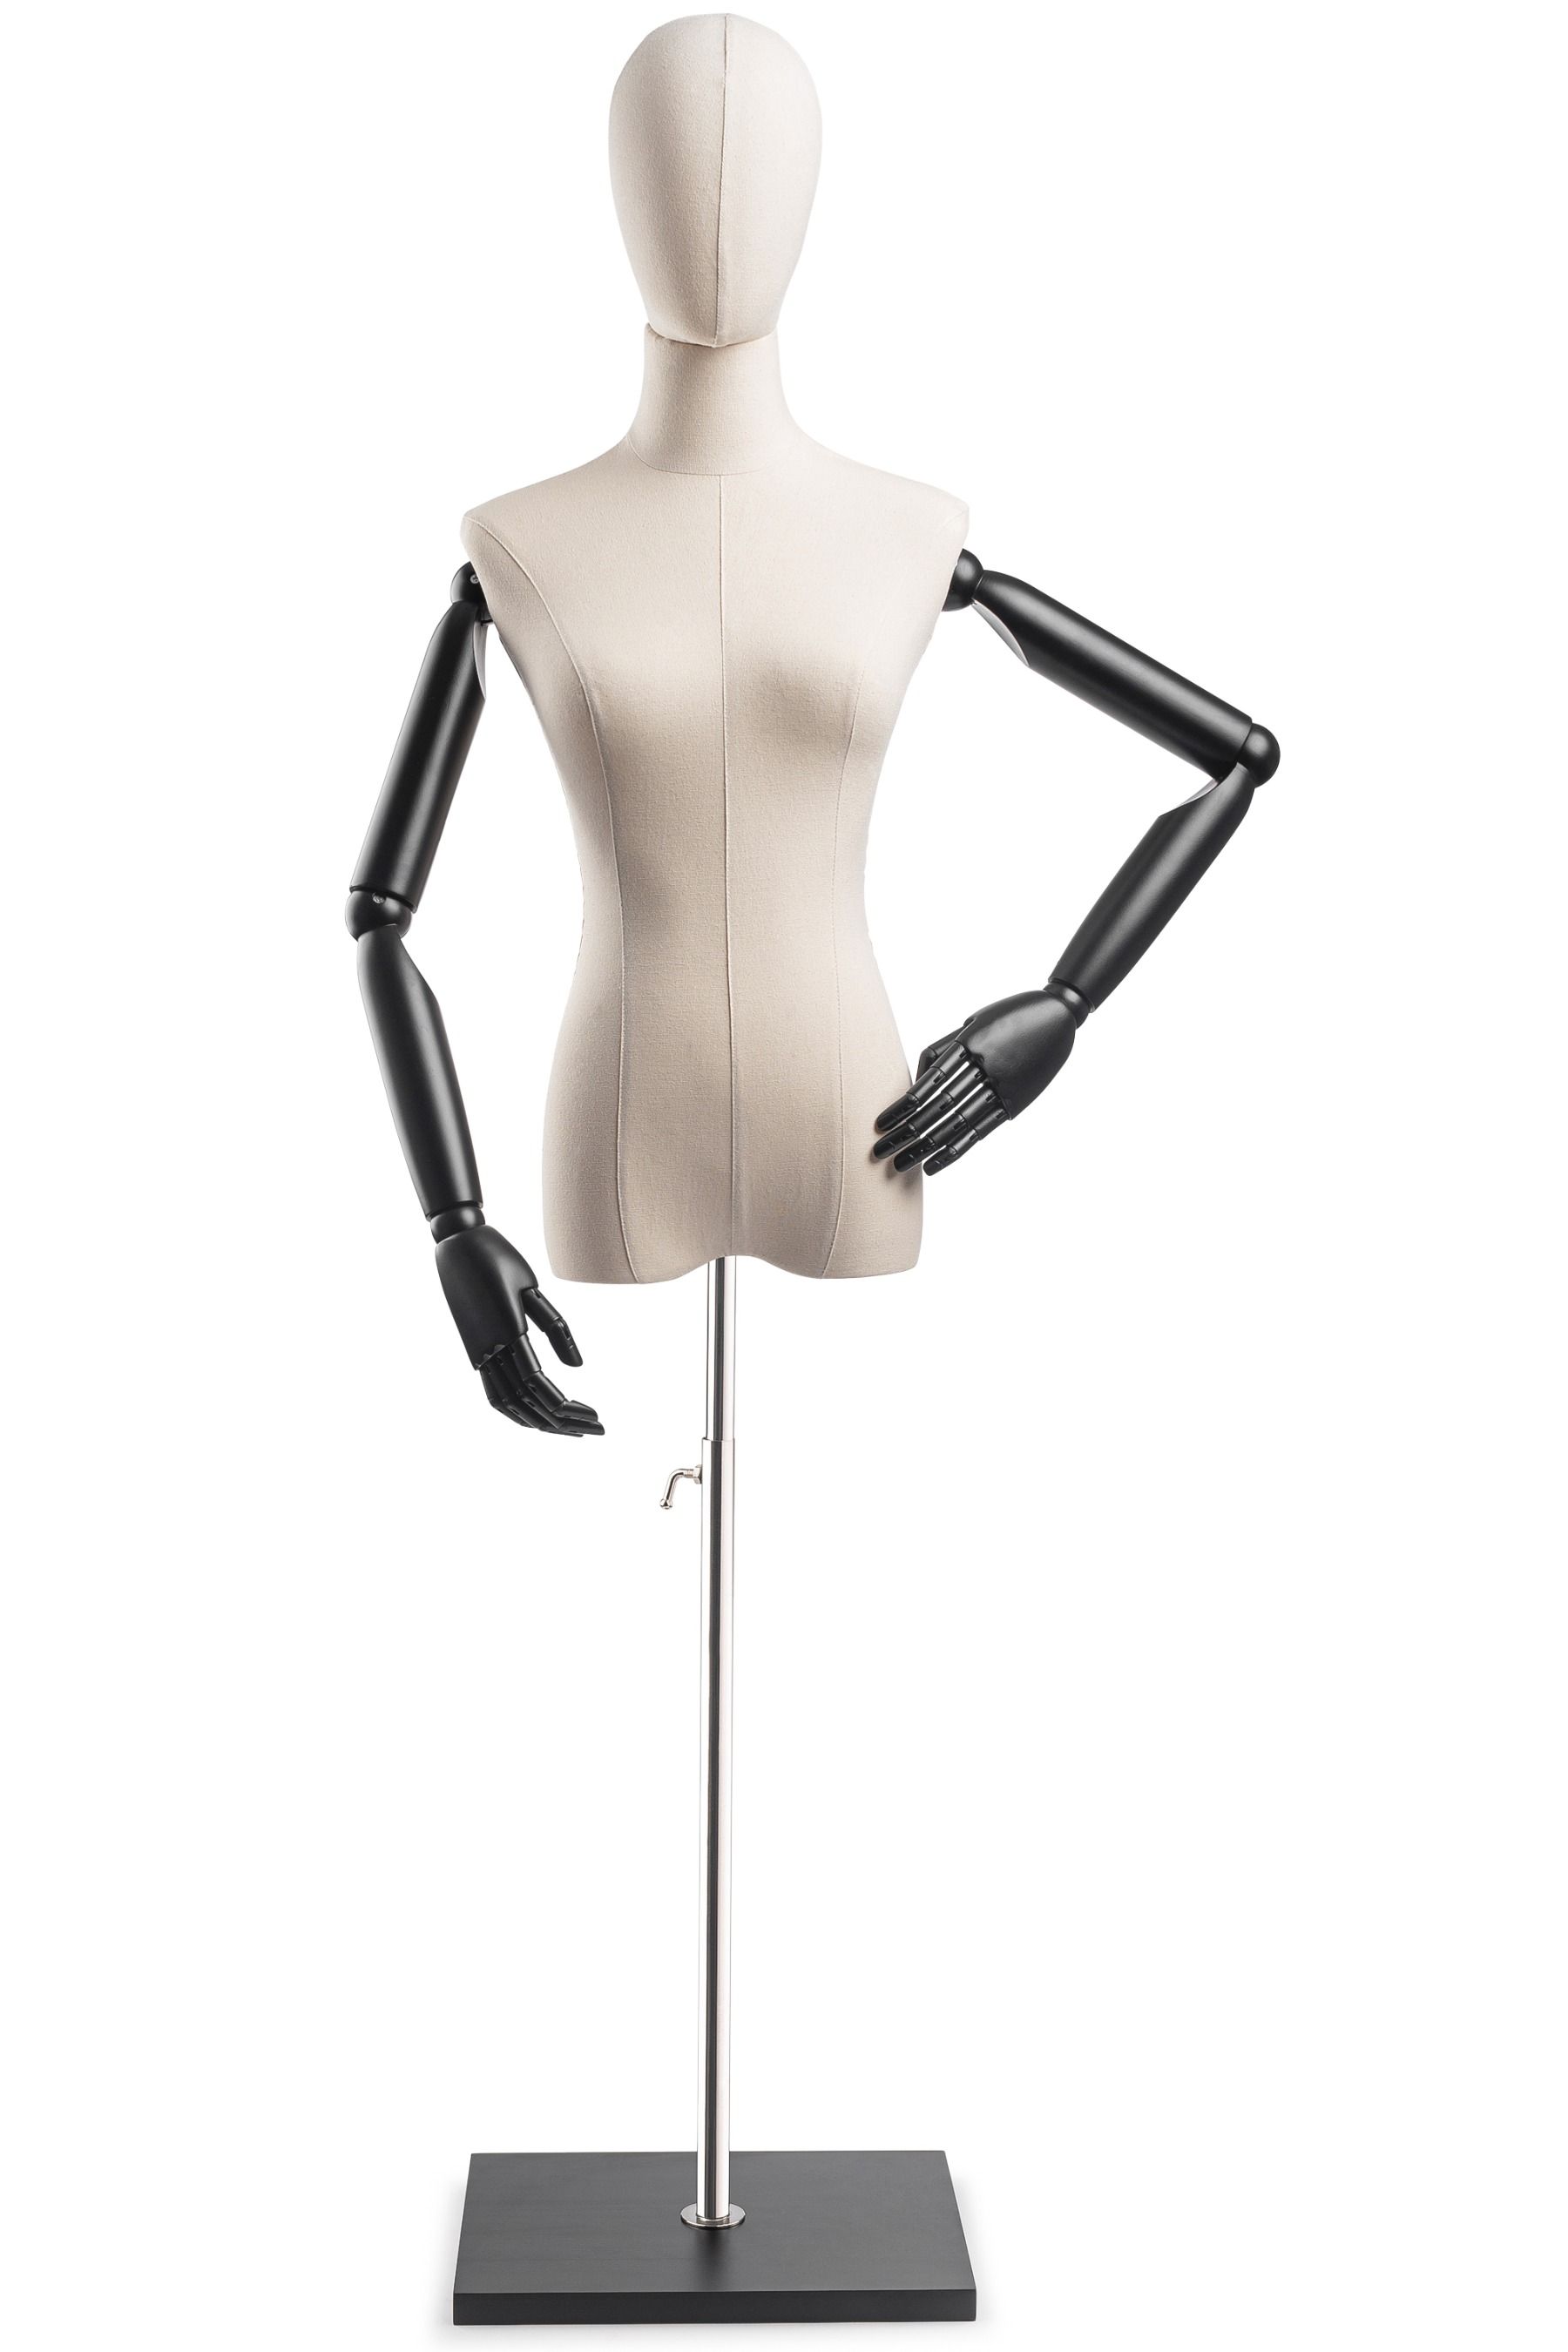 DE-LIANG Half Scale Fiberglass Sewing Dress Form, Anatomic Miniature  Fitting Mannequin Torso for Draping,pinnable Dressform | Tailor  Dummy,Sewing Tool, Design Fabric Dressmaker : Amazon.in: Home & Kitchen